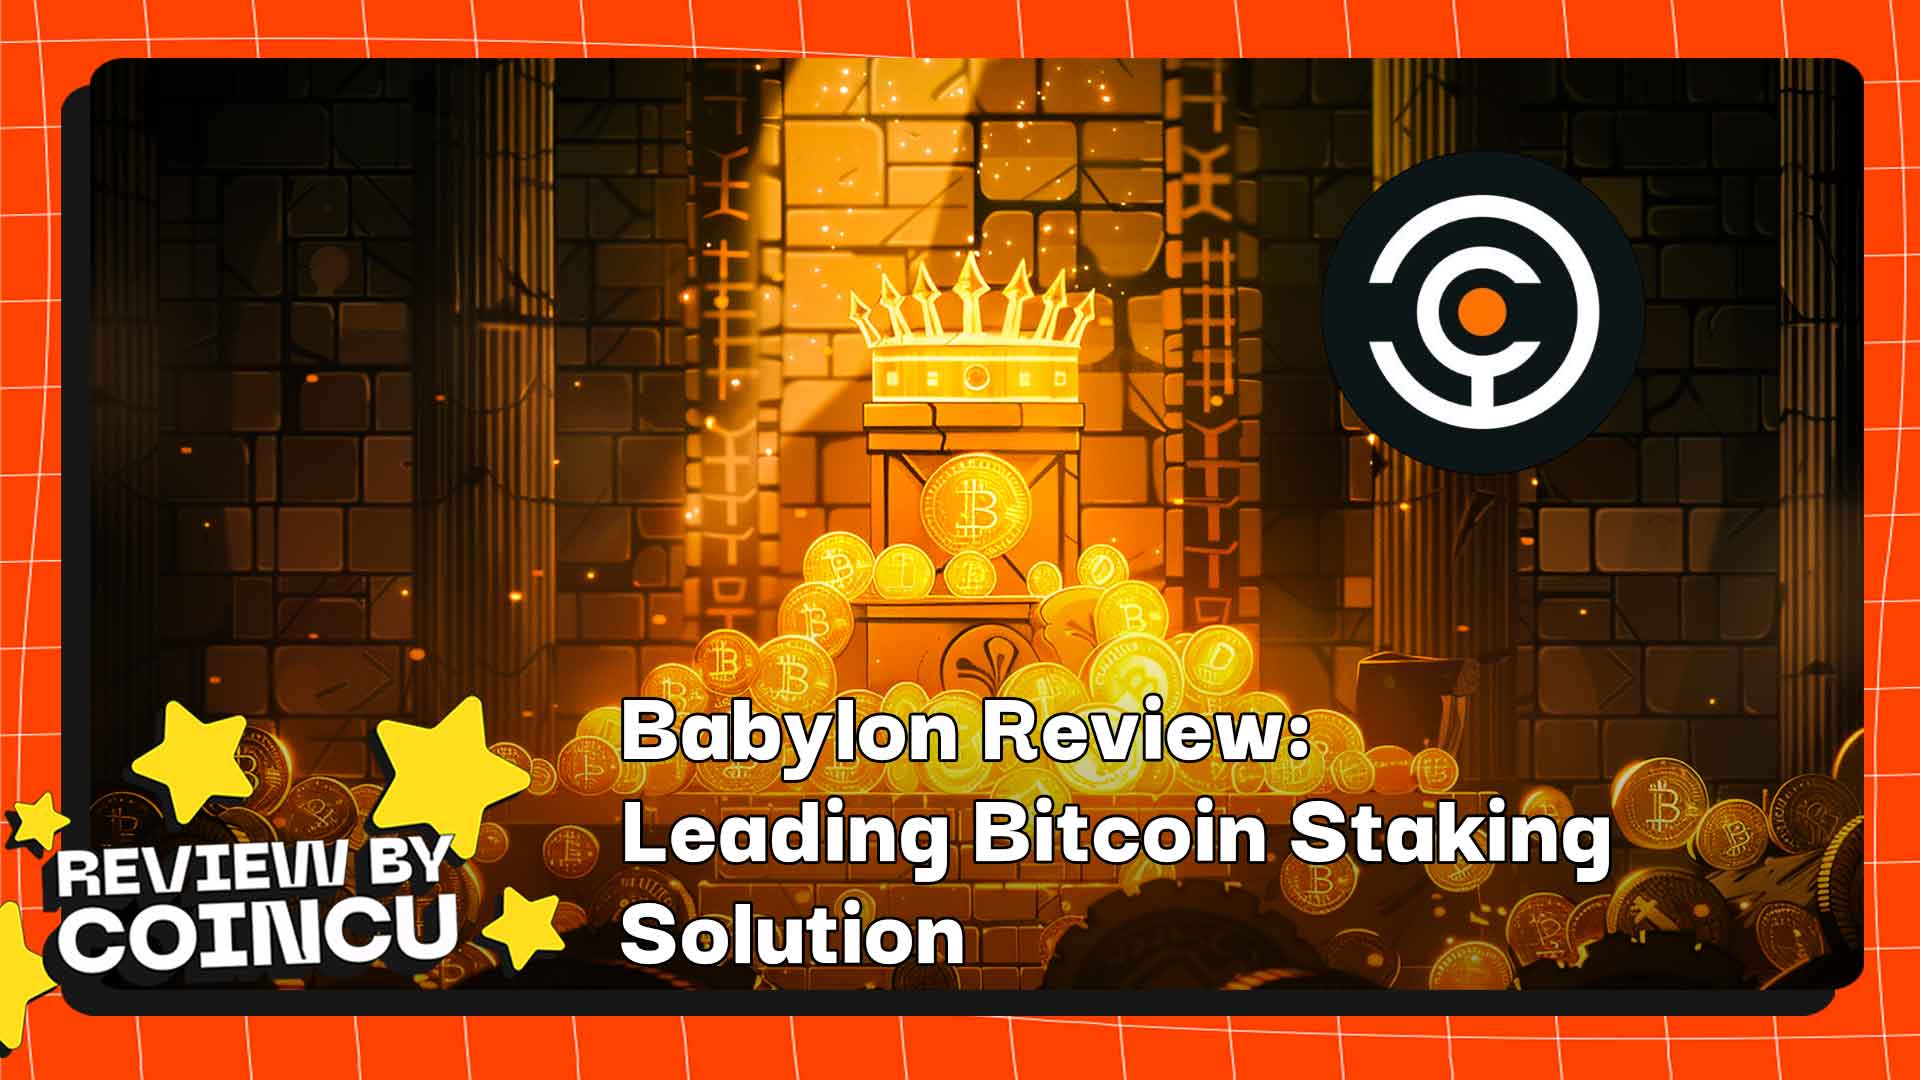 Babylon Review: Leading Bitcoin Staking Solution